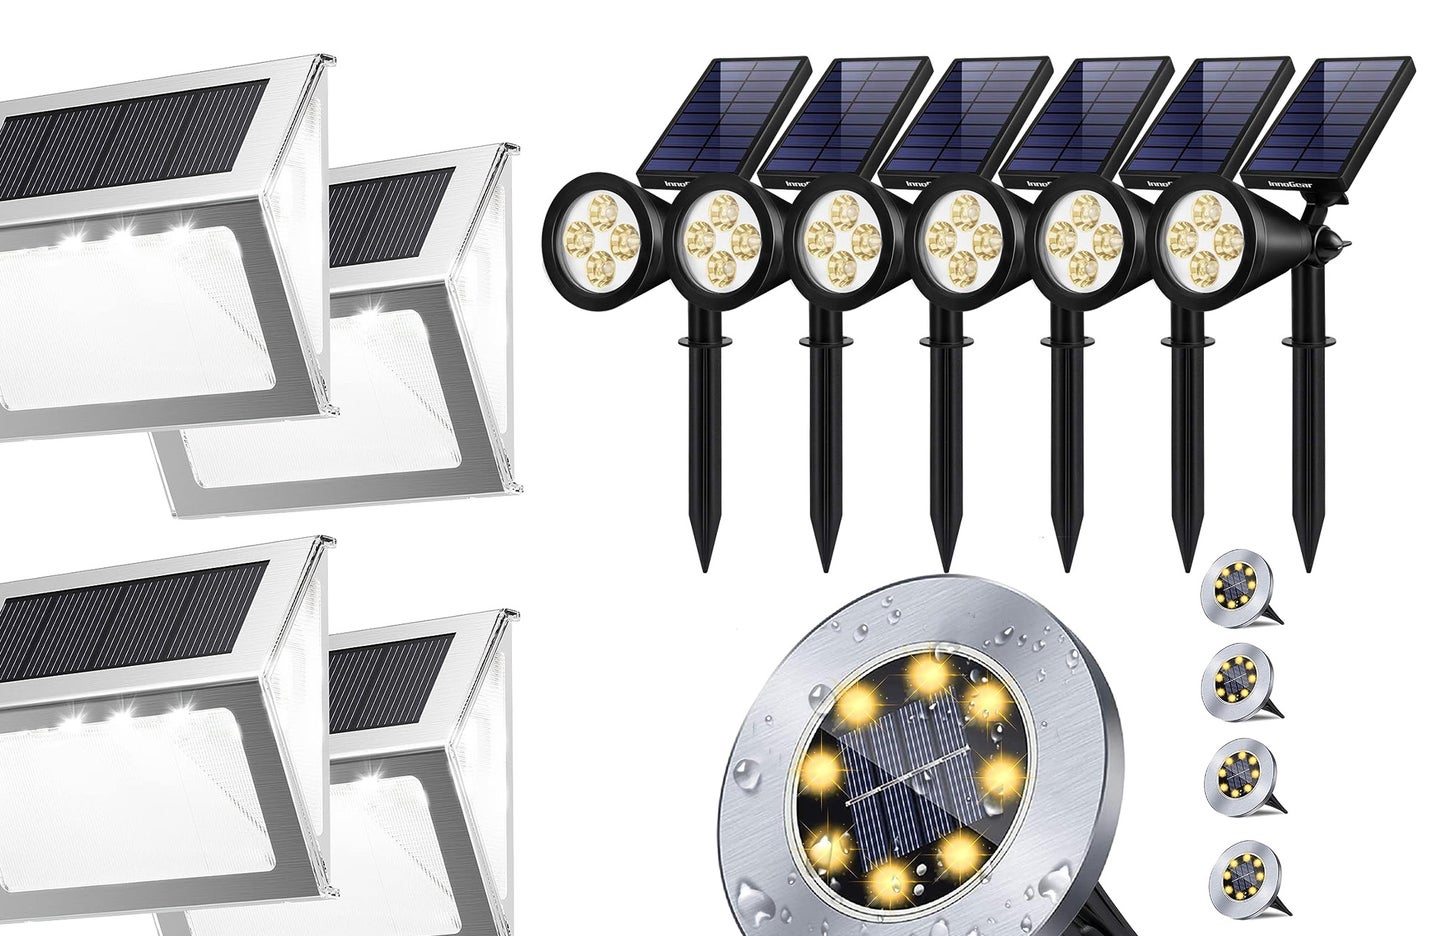 The best solar landscape lights will illuminate your path and save energy.